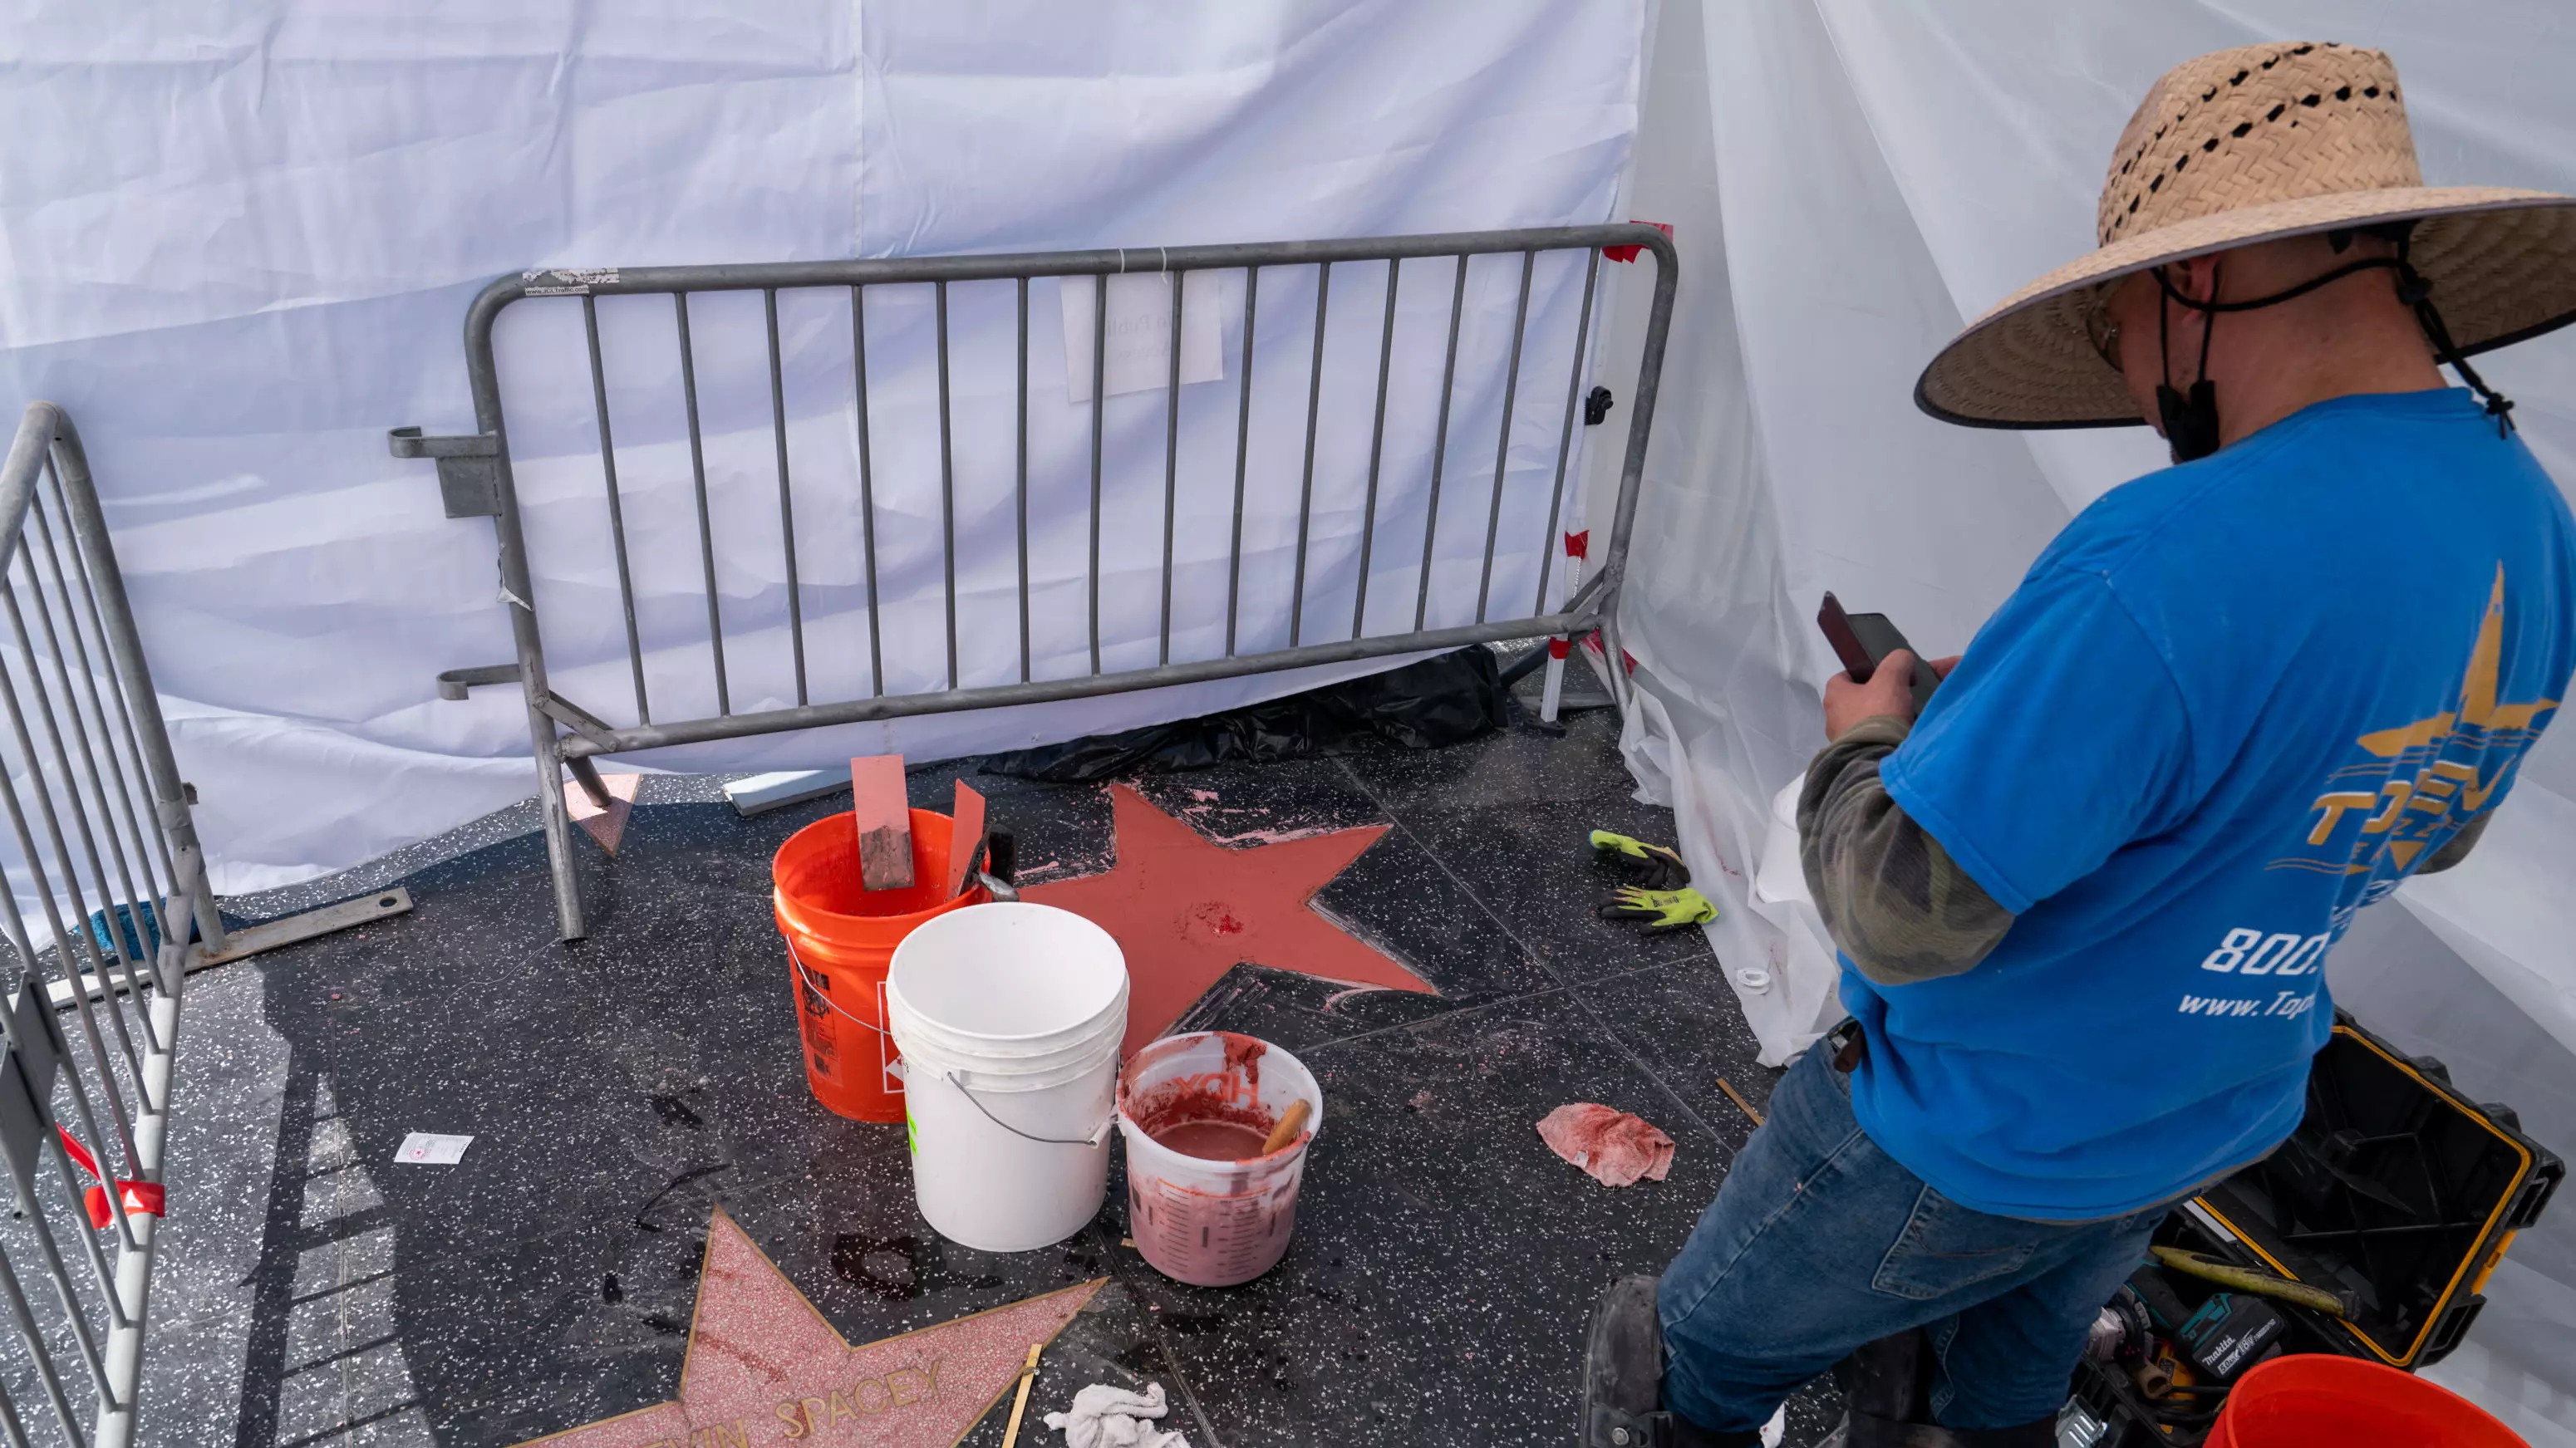 Donald Trump's Hollywood Walk Of Fame Star Smashed By Someone Dressed As Hulk